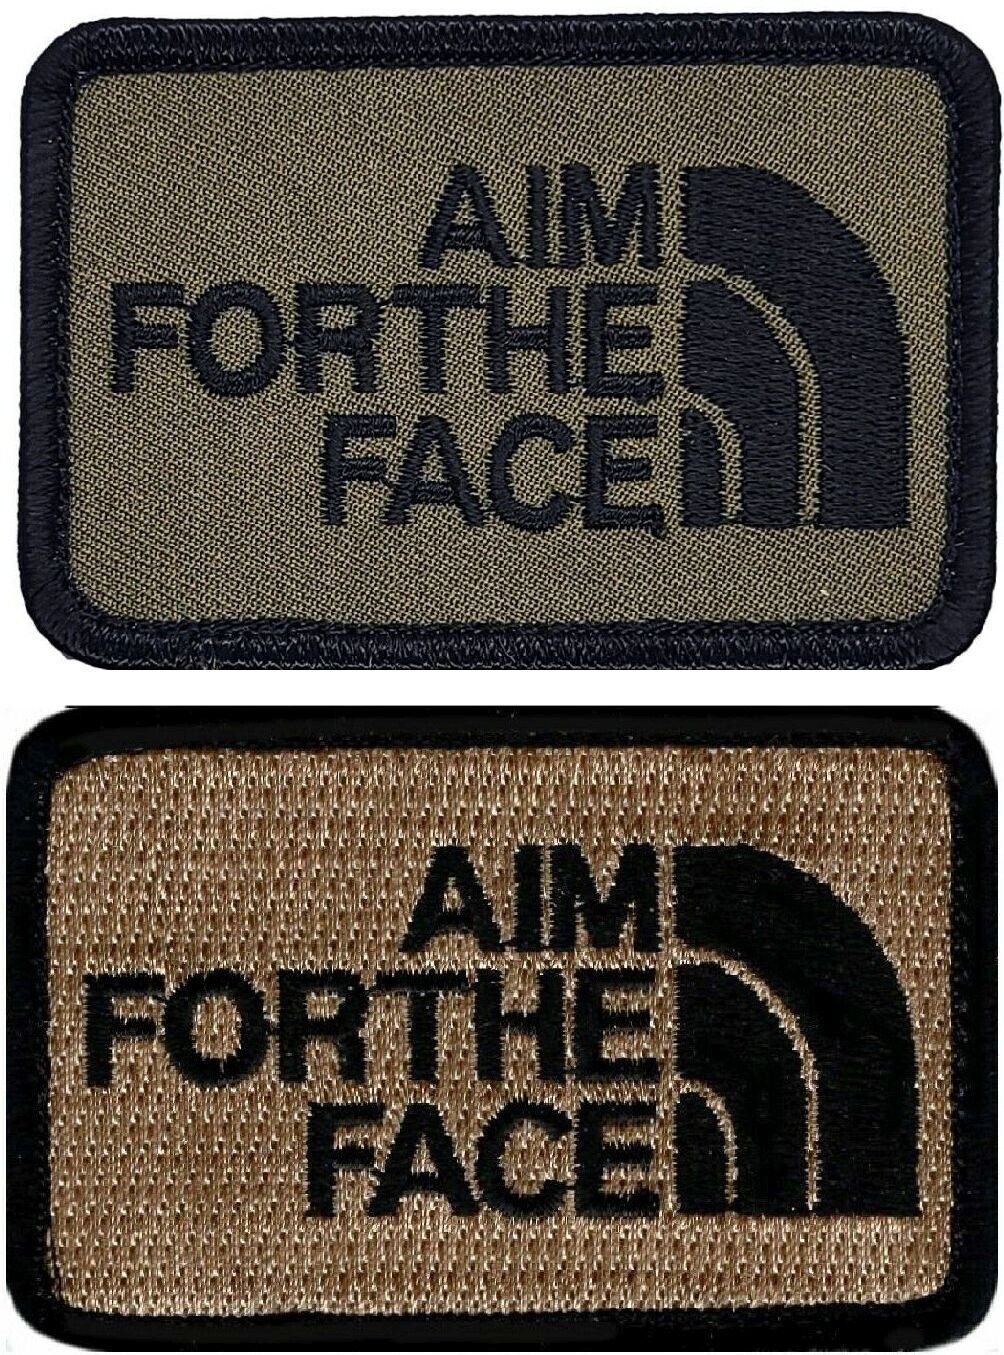 Aim for the Face Embroidered Morale Patch - 2PC Bundle - Hook Backing